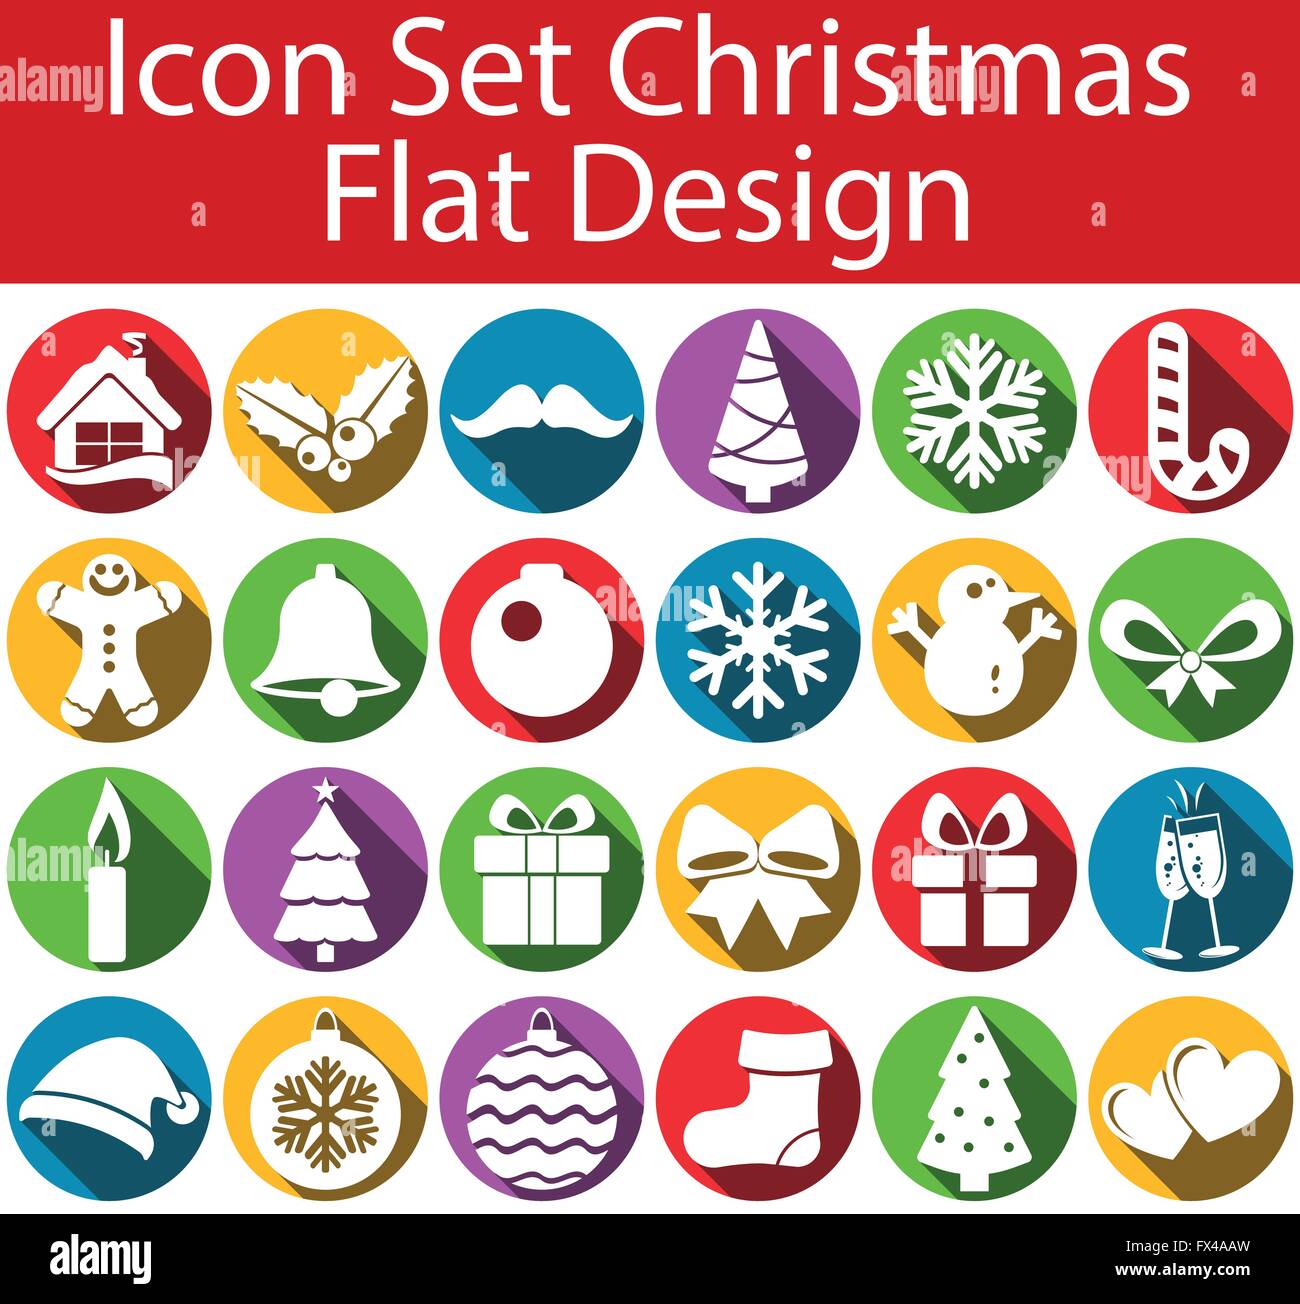 Flat Design Icon Set Christmas with 24 icons for the creative use in web an graphic design Stock Vector